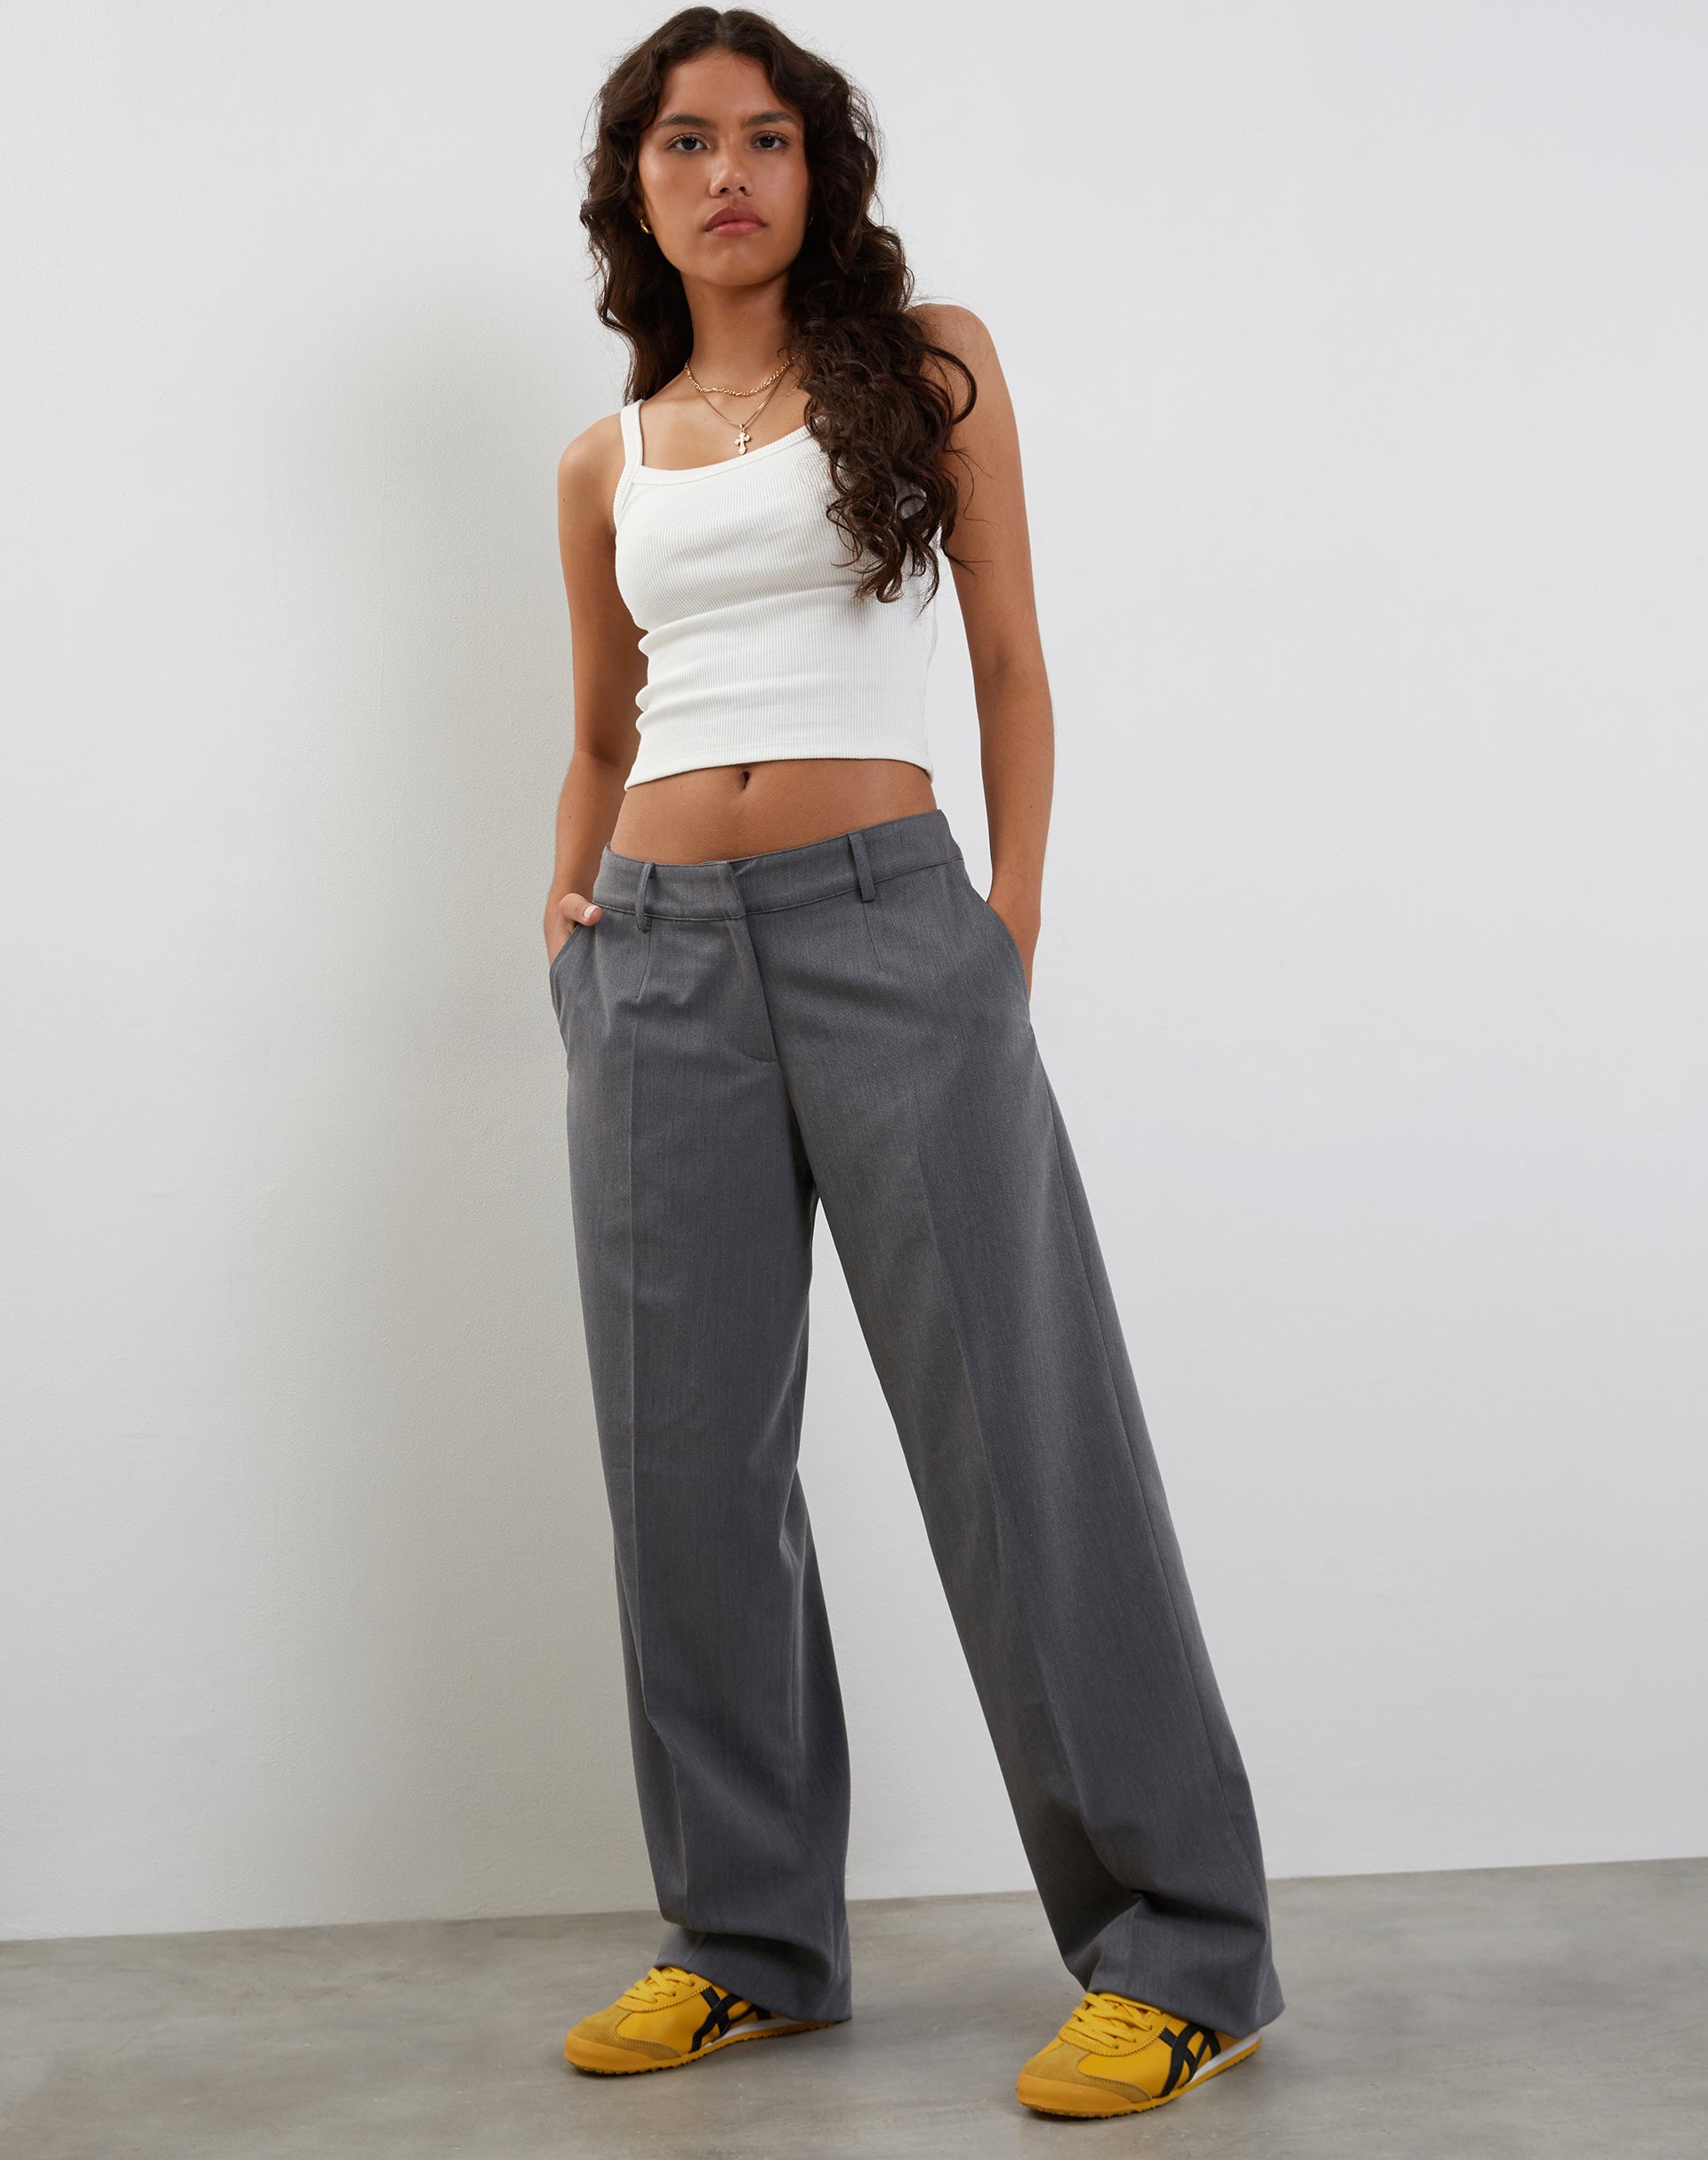 image of Sirkia Low Rise Tailored Trouser in Charcoal